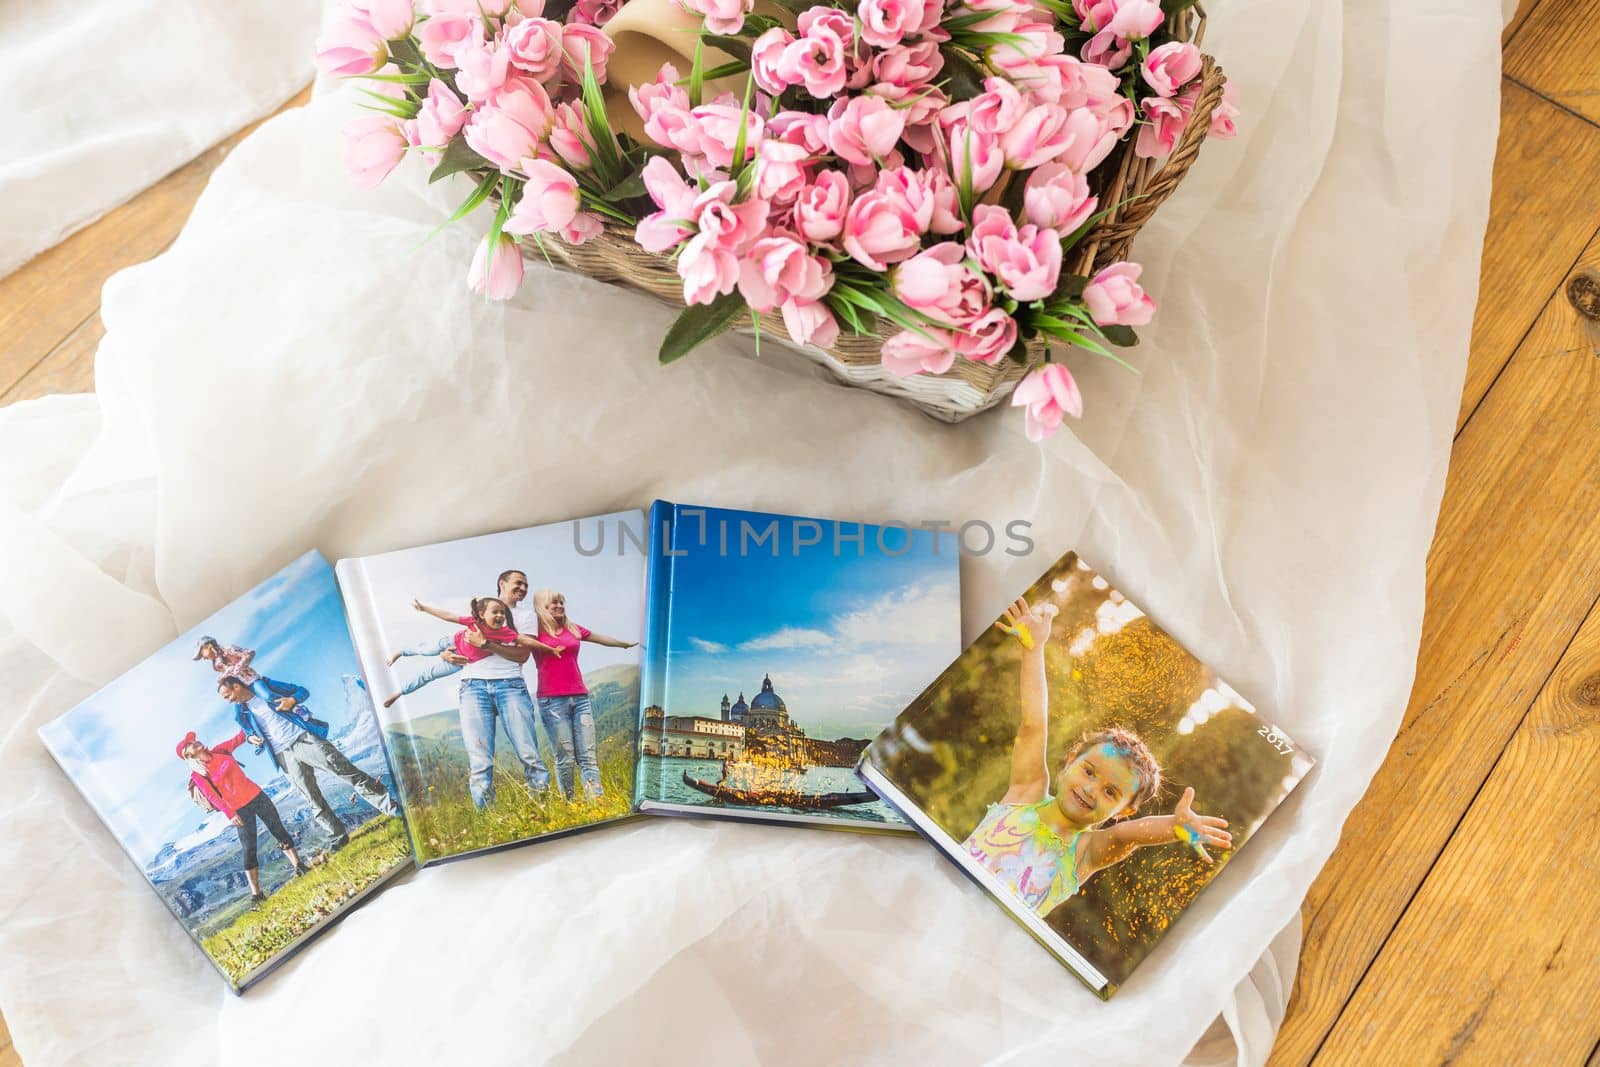 photo books and flowers, photo album by Andelov13